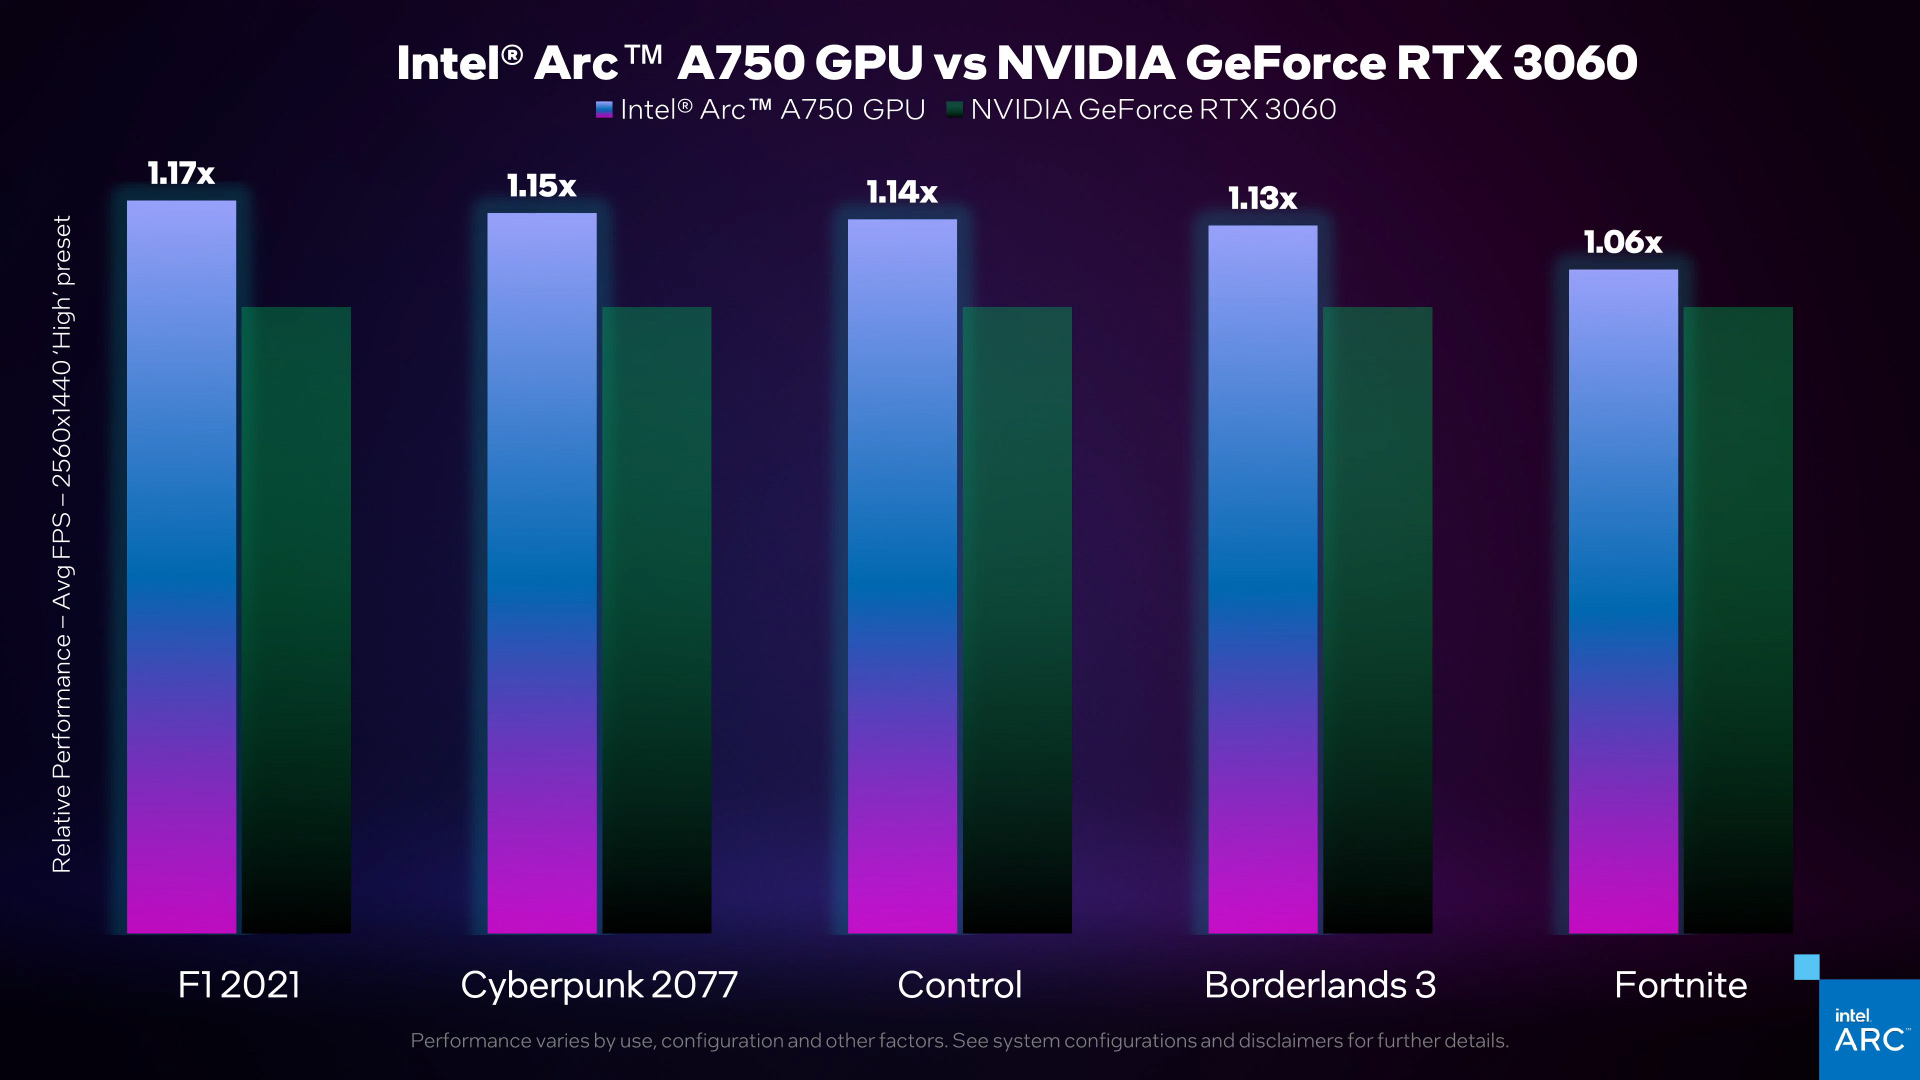 The redemption of Arc begins -- Intel beats Nvidia by 17 